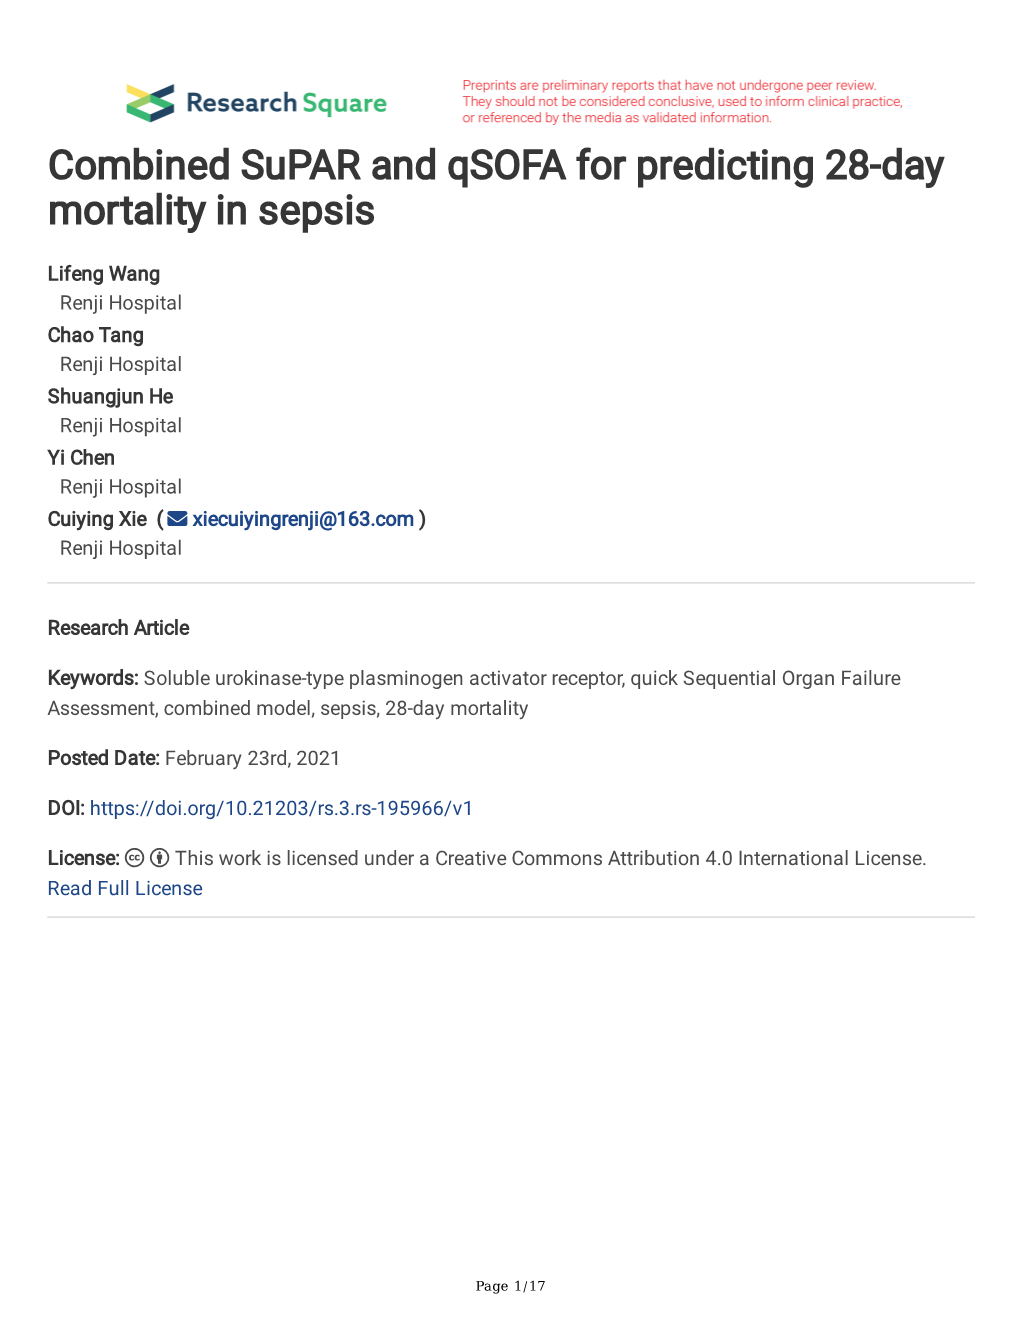 Combined Supar and Qsofa for Predicting 28-Day Mortality in Sepsis